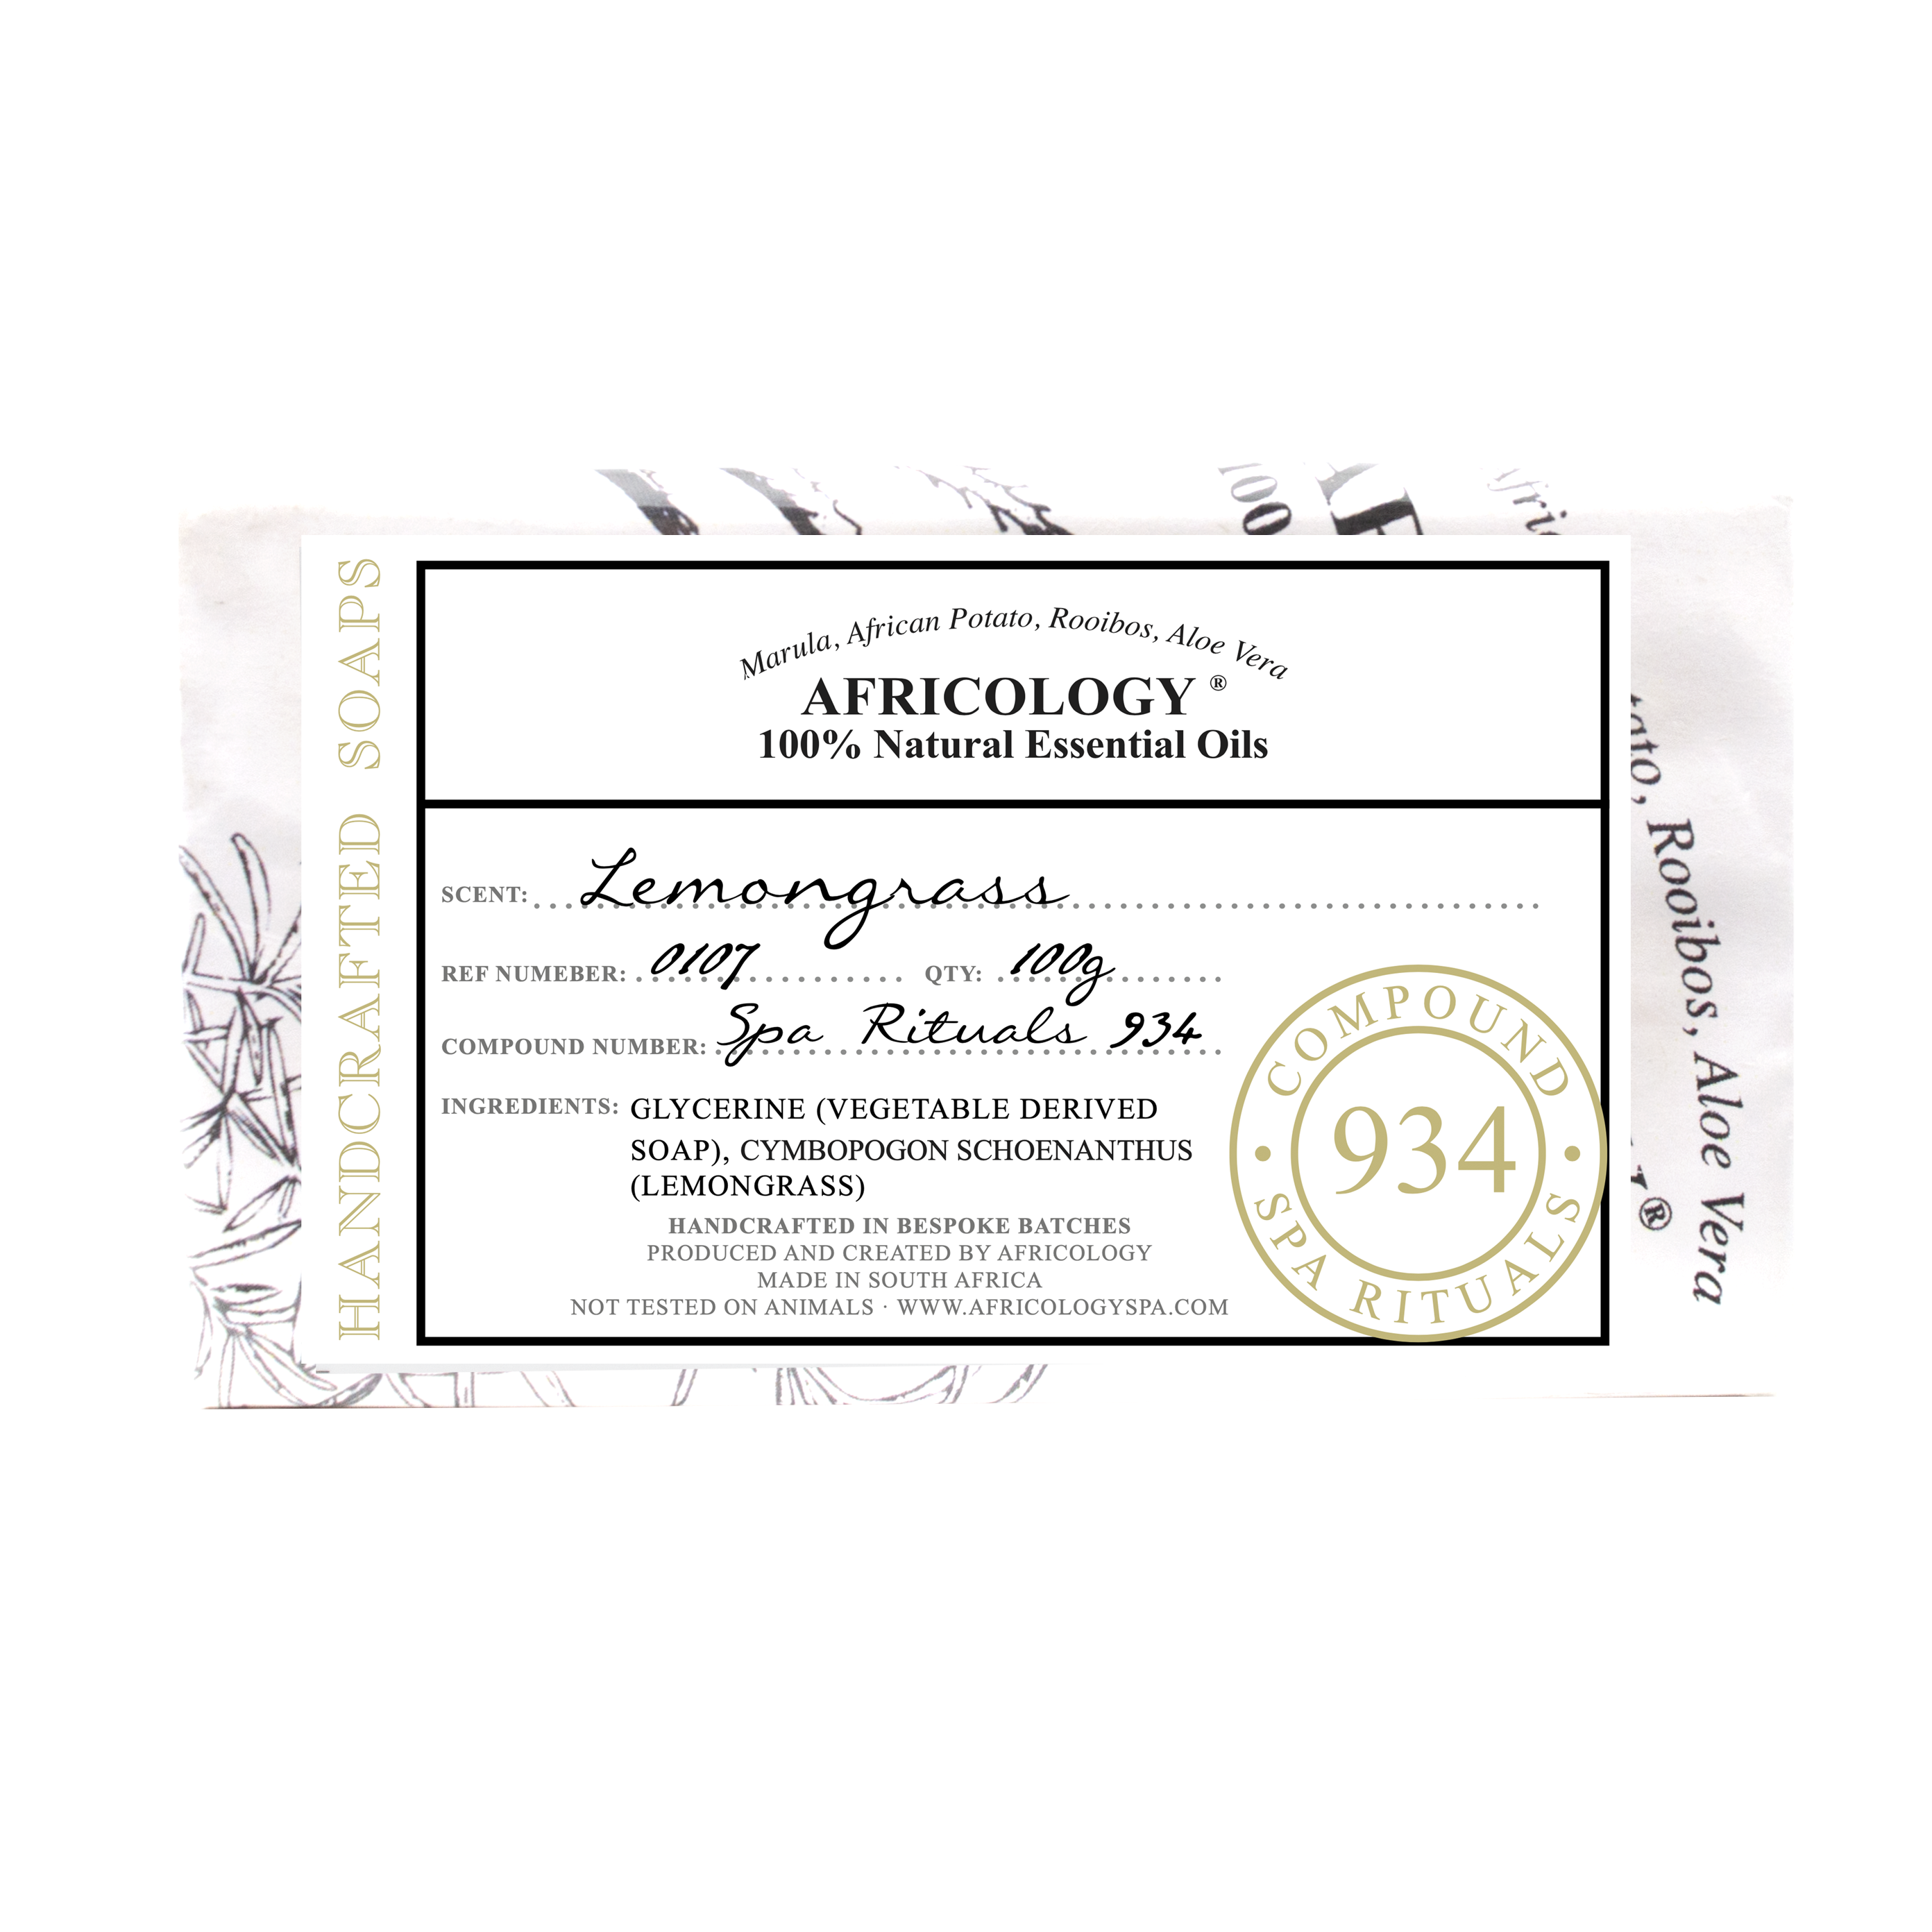 Africology Lemongrass Hand-Crafted Soap